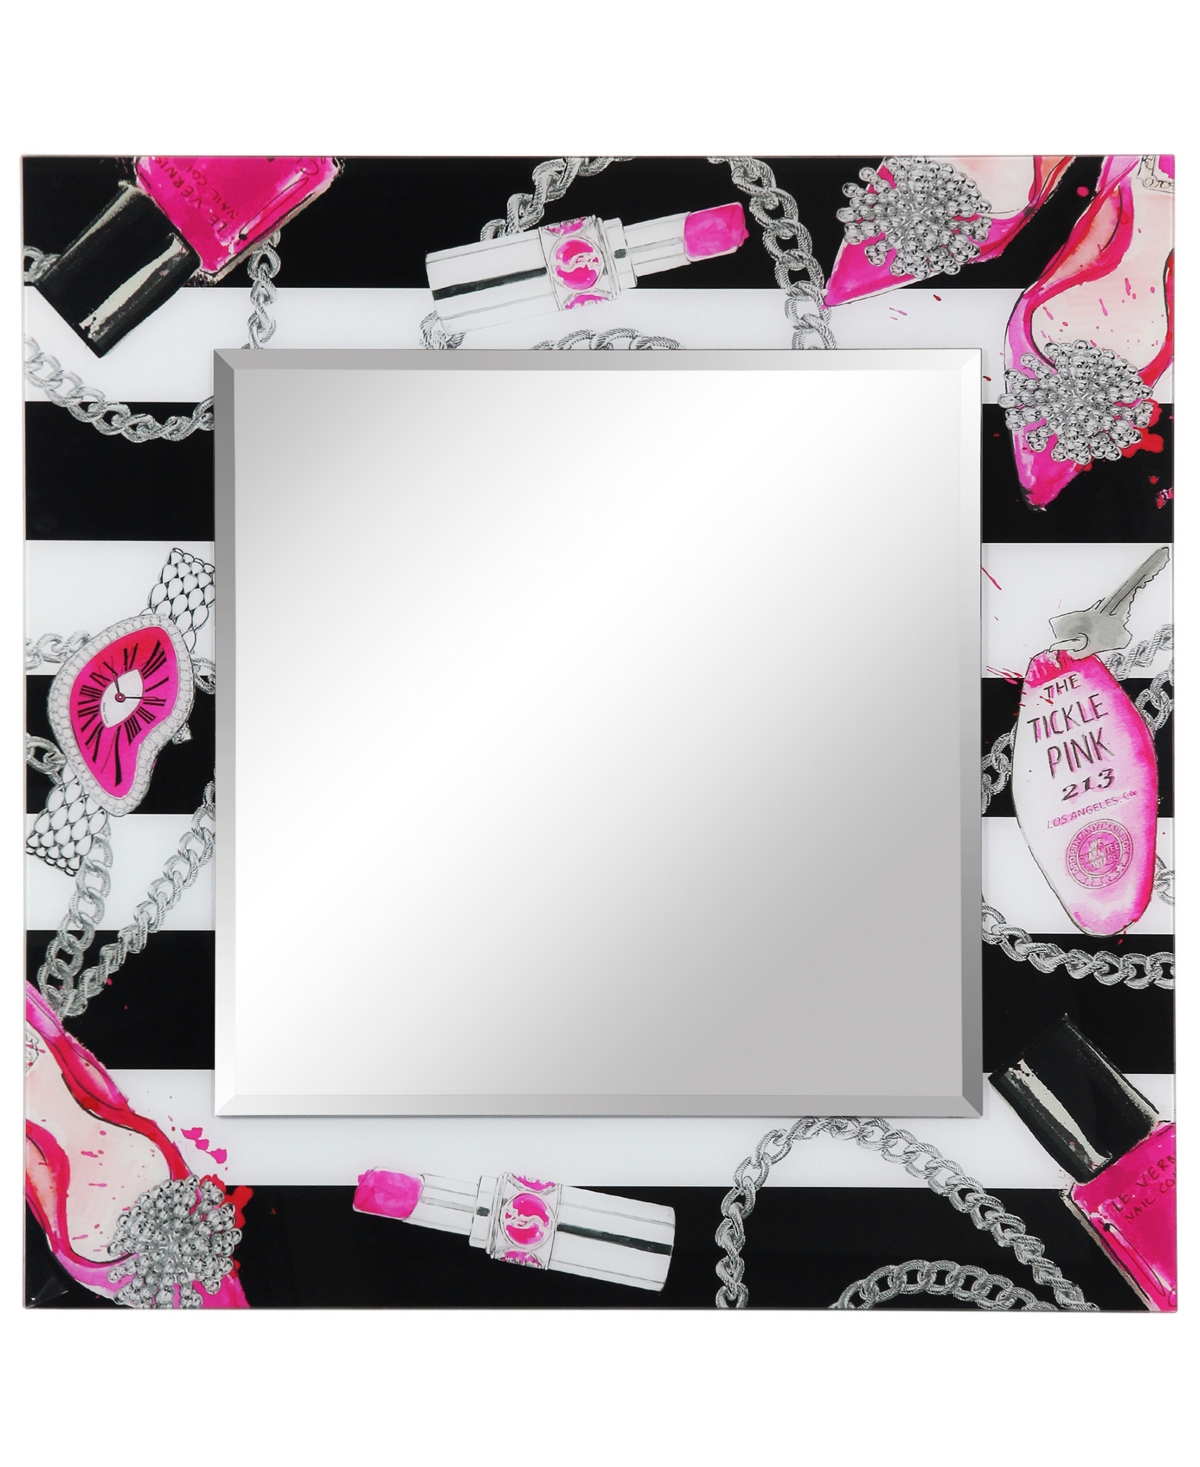 Essentials Square Beveled Wall Mirror on Free Floating Reverse Printed Tempered Art Glass, 36" x 36" x 0.4" - Multi